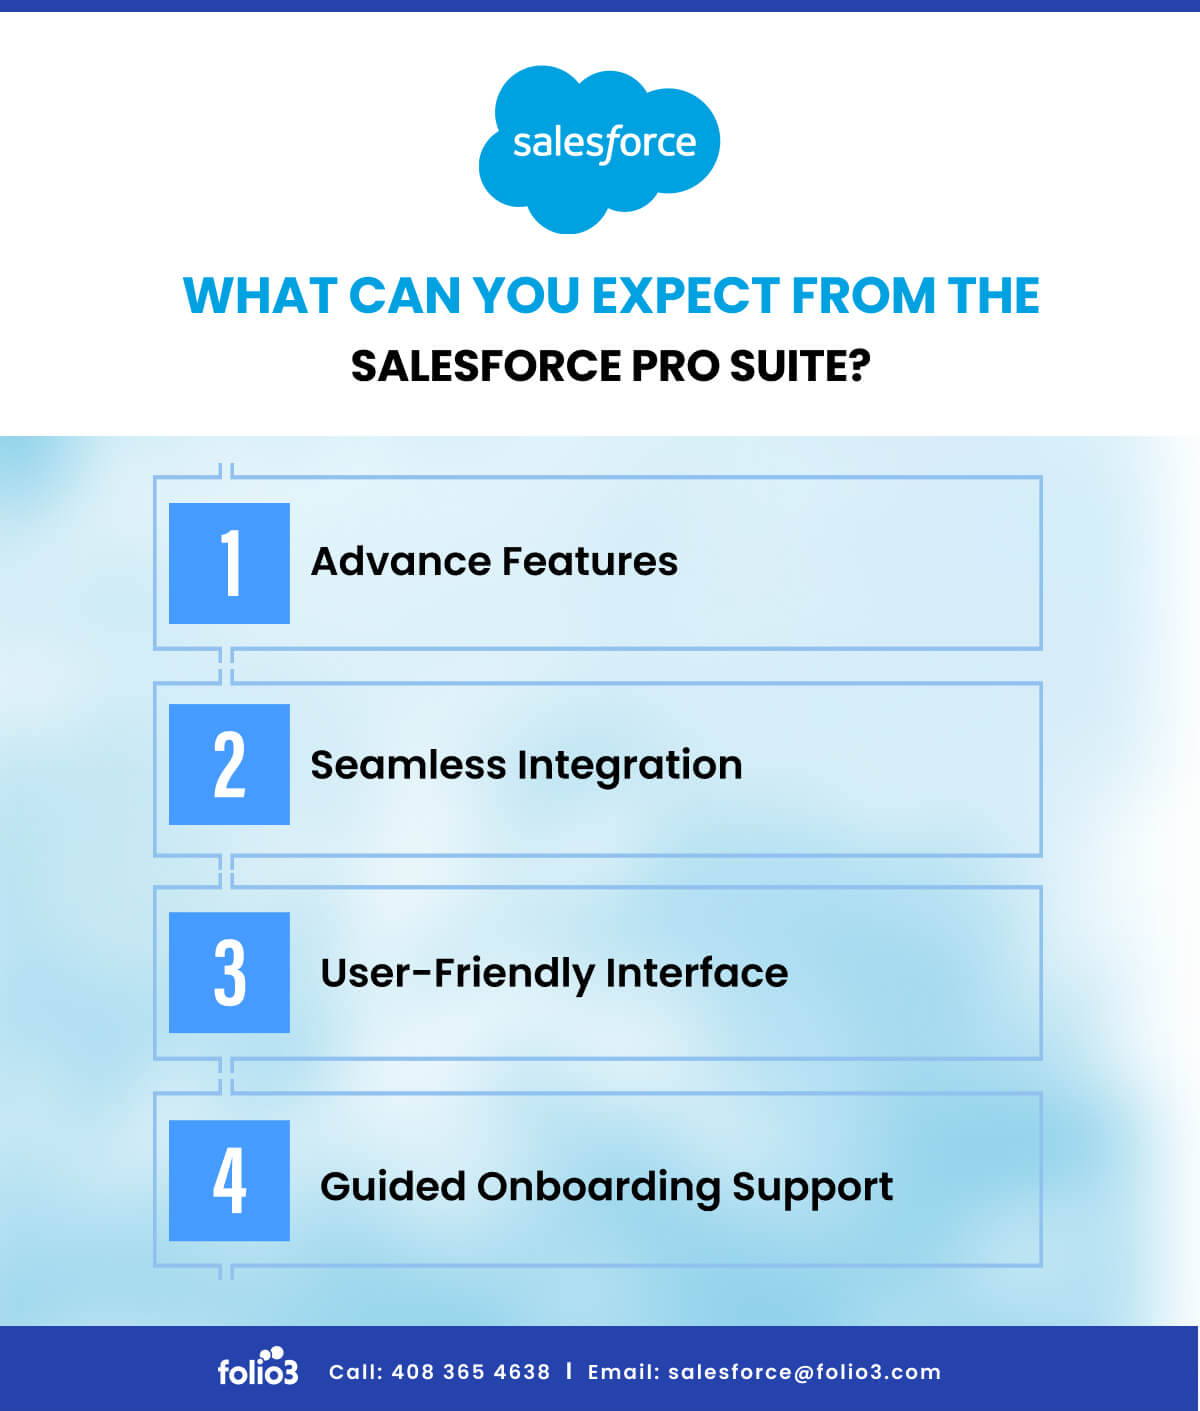 What can you expect from the Salesforce Pro Suite